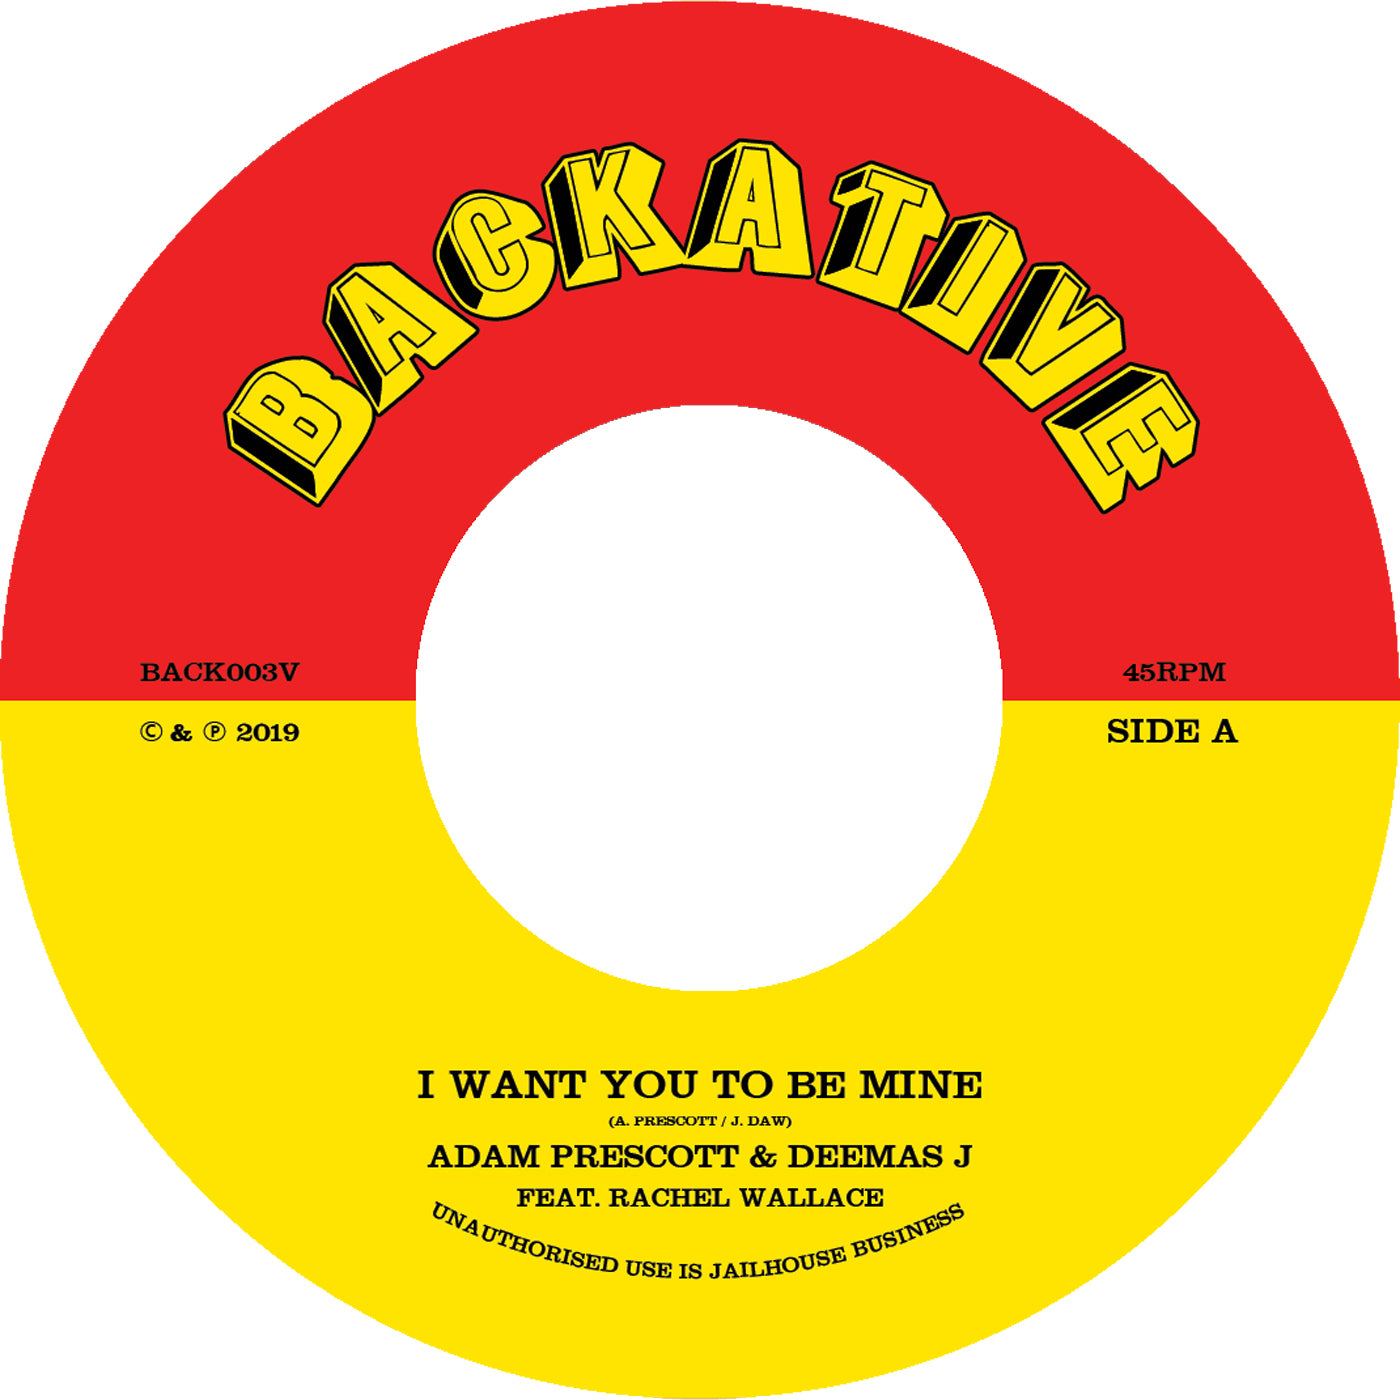 I Want You To Be Mine  (7" Vinyl)